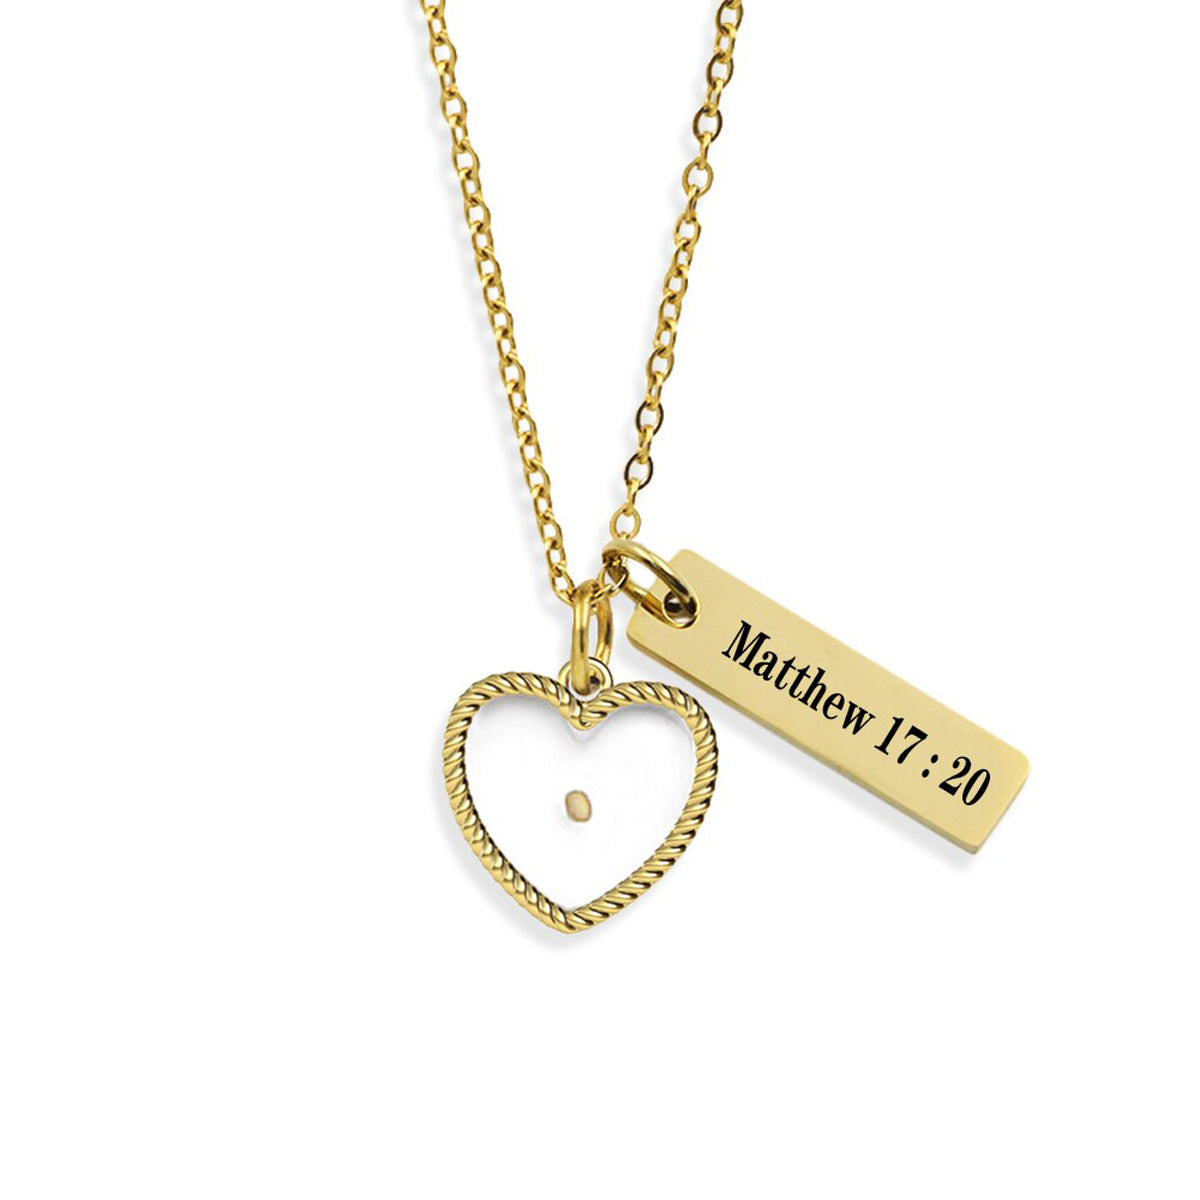 Mustard Seed Faith Heart W/Verse Necklace Gold Stainless Steel Jewelry